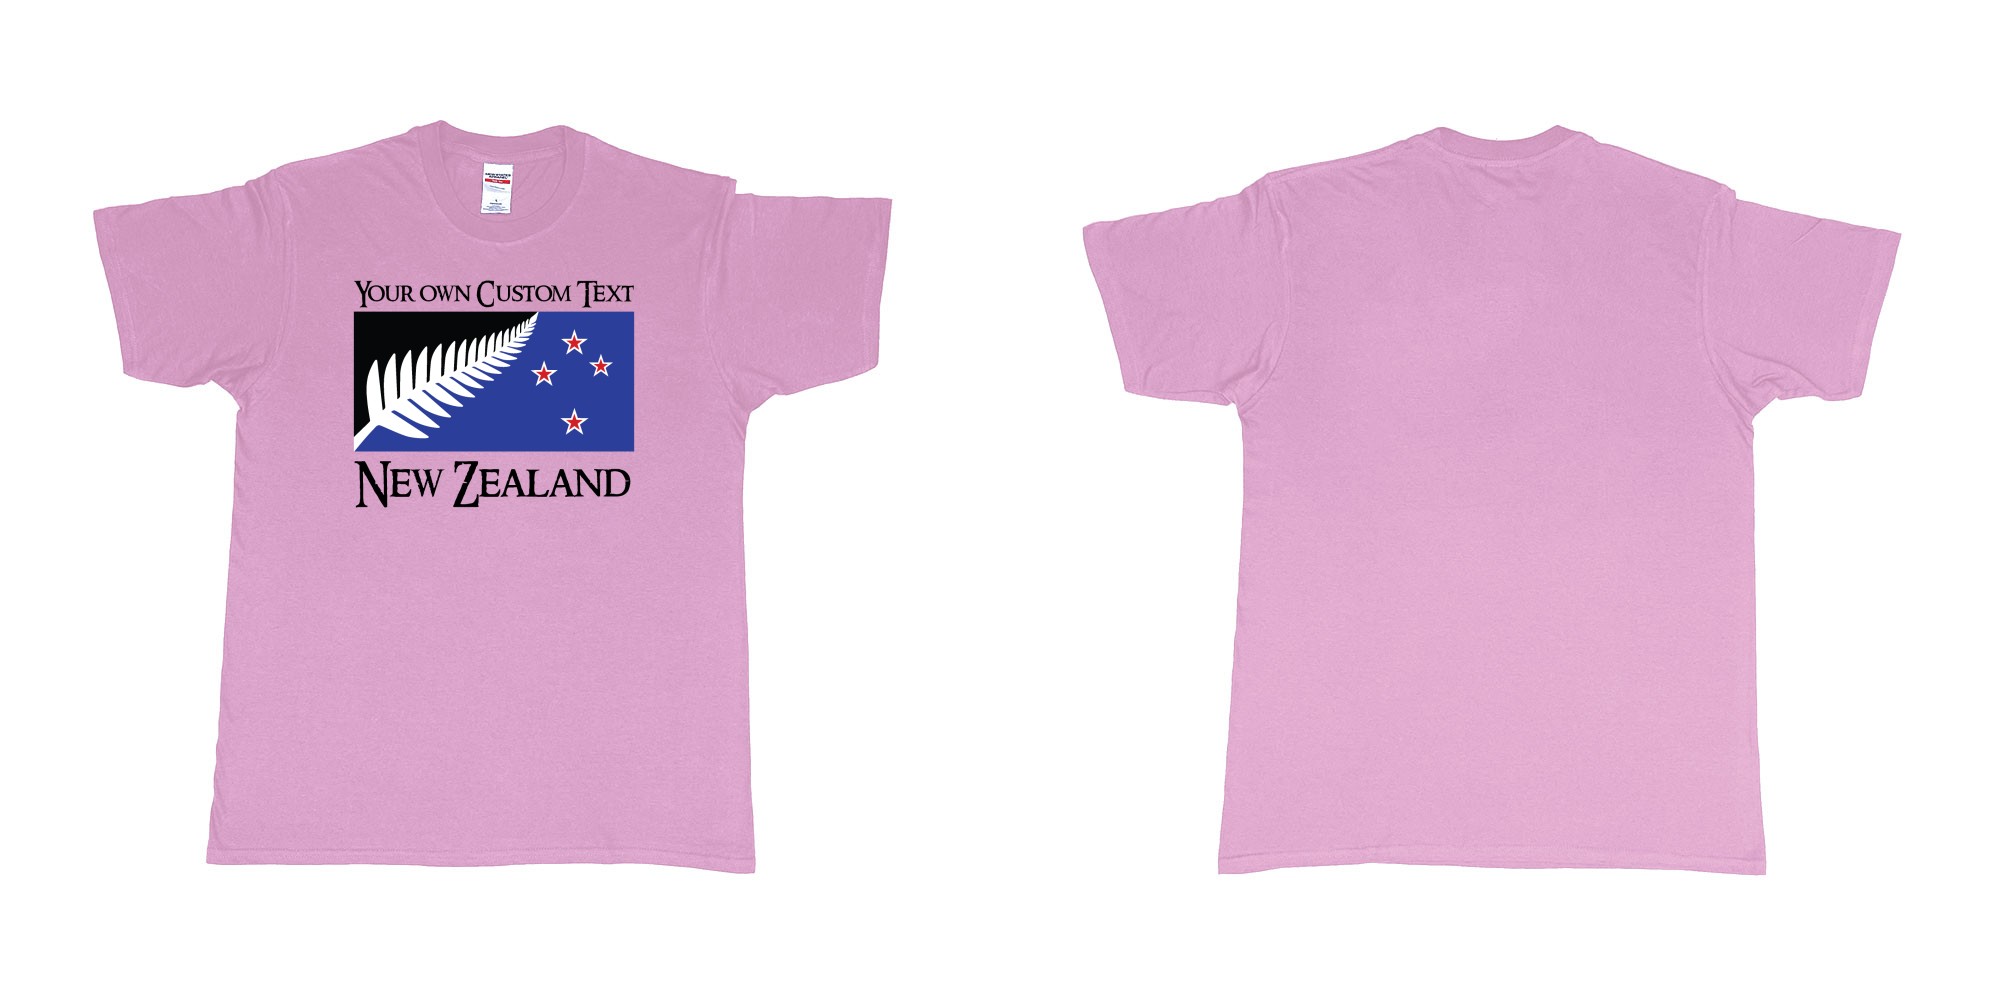 Custom tshirt design new zealand silver fern flag in fabric color light-pink choice your own text made in Bali by The Pirate Way